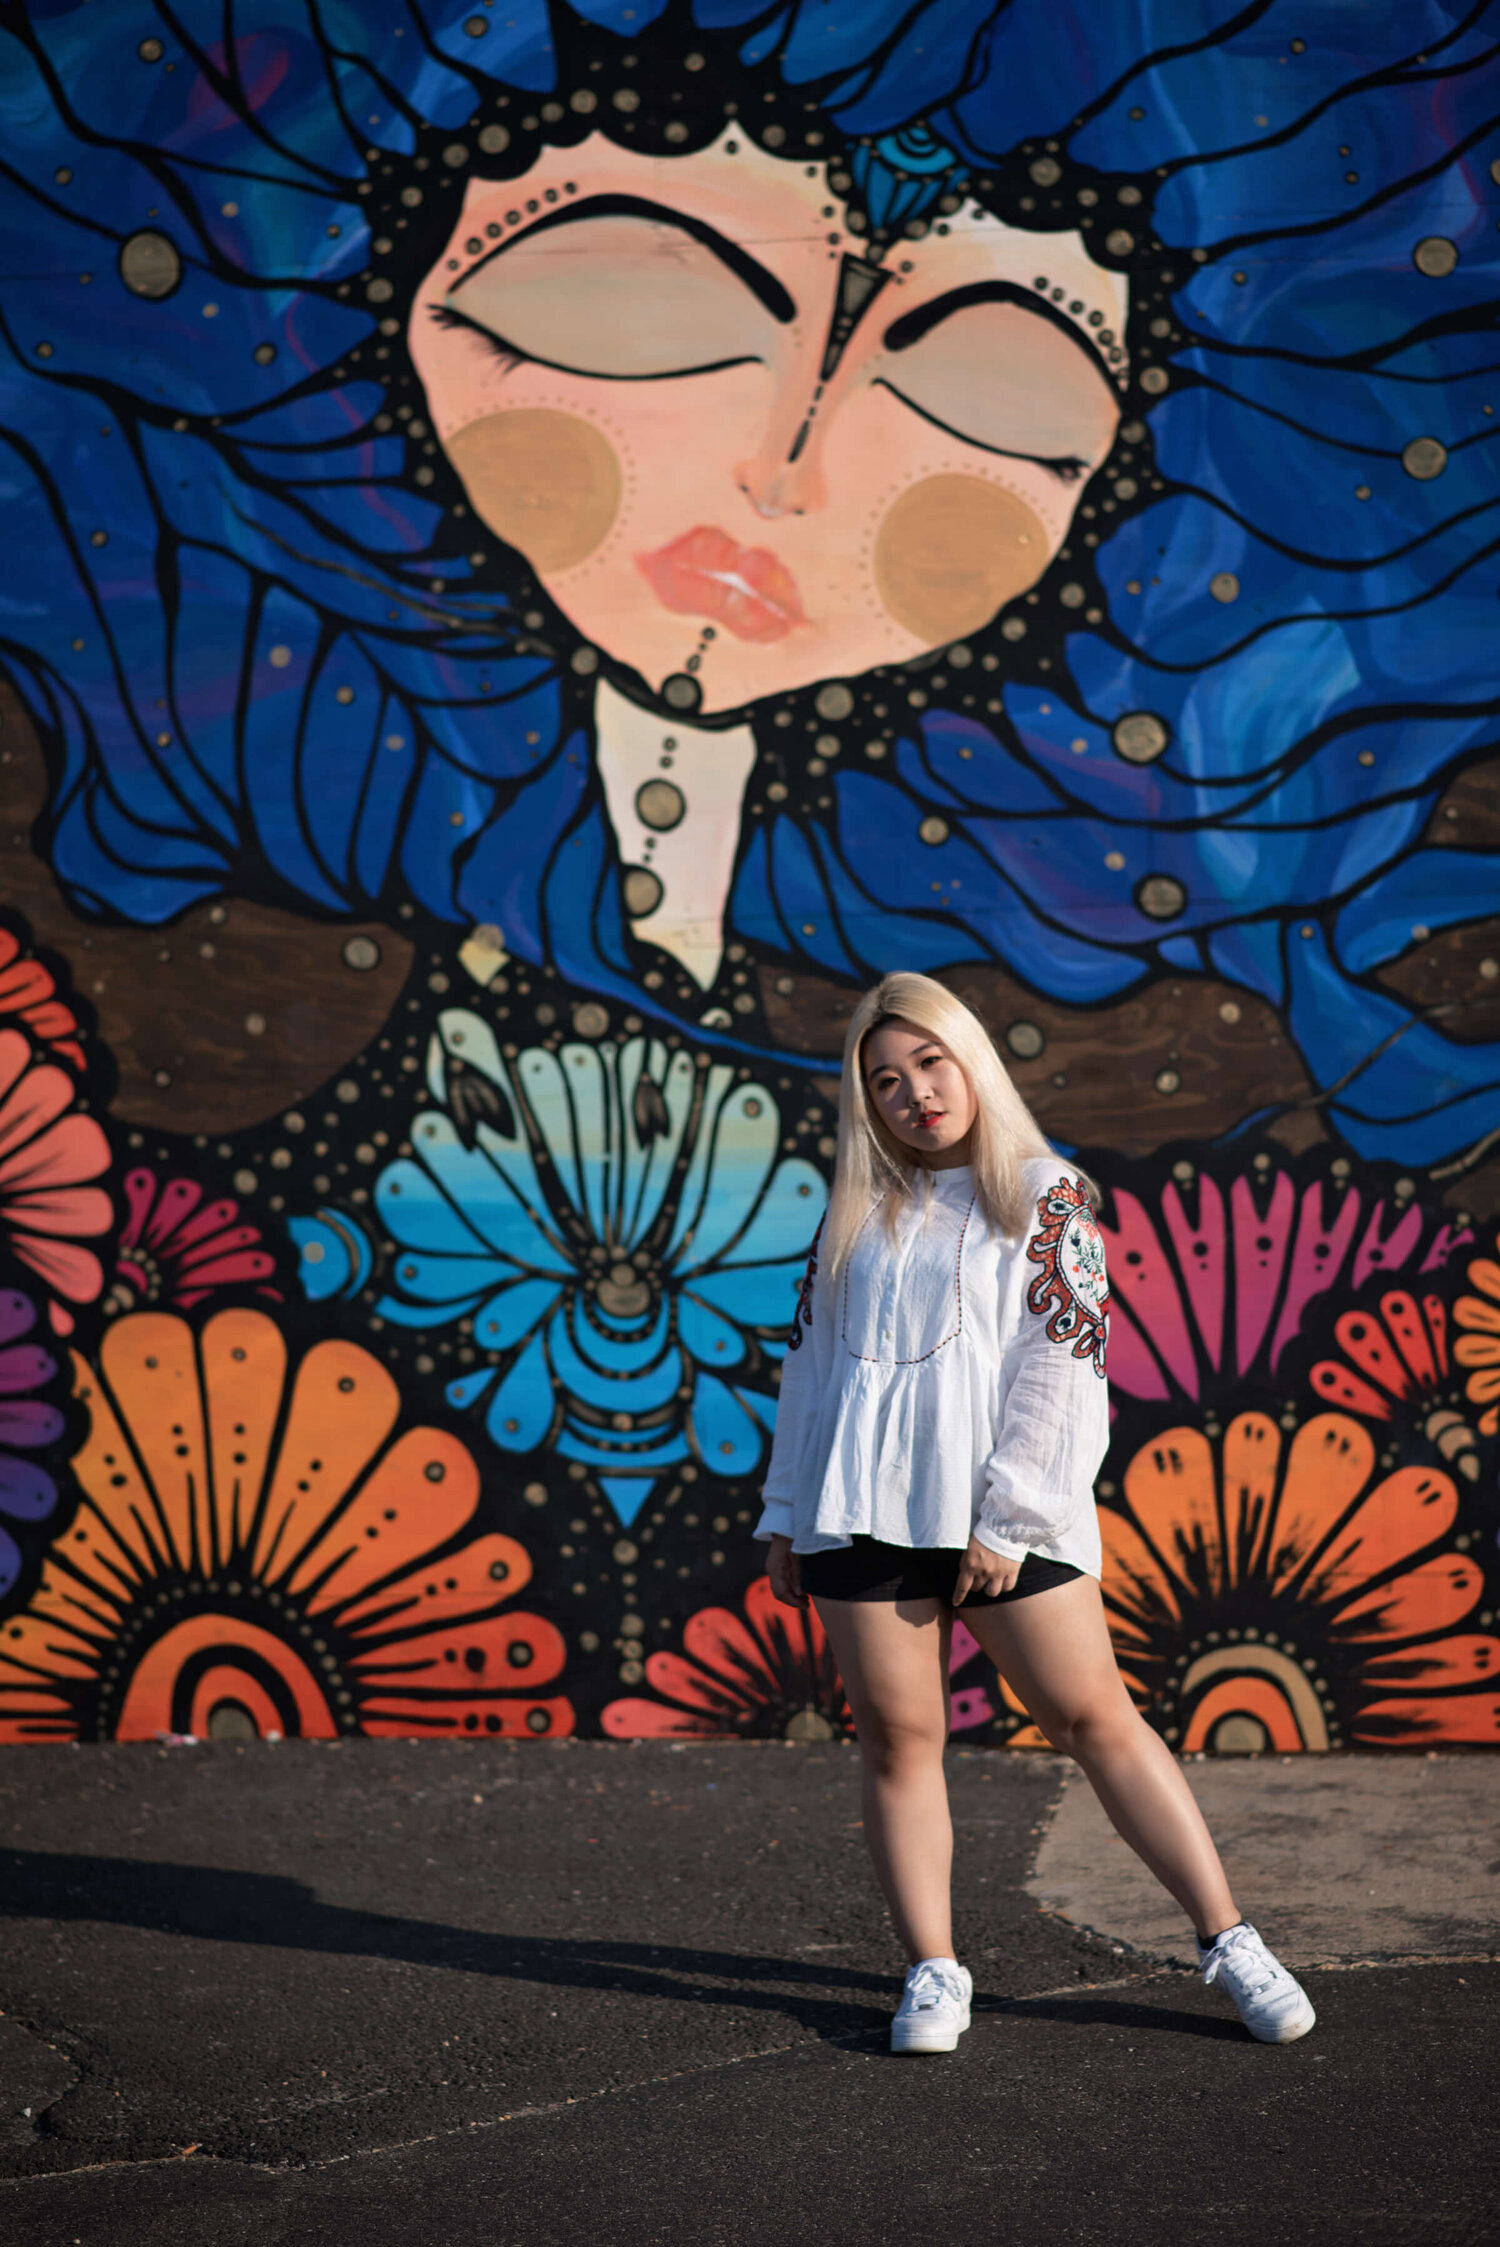 Phoebe in front of a wall mural in Asbury Park. Follow @woodenwallsproject to learn more about these amazing artworks! This amazing art is by @theartofpau.